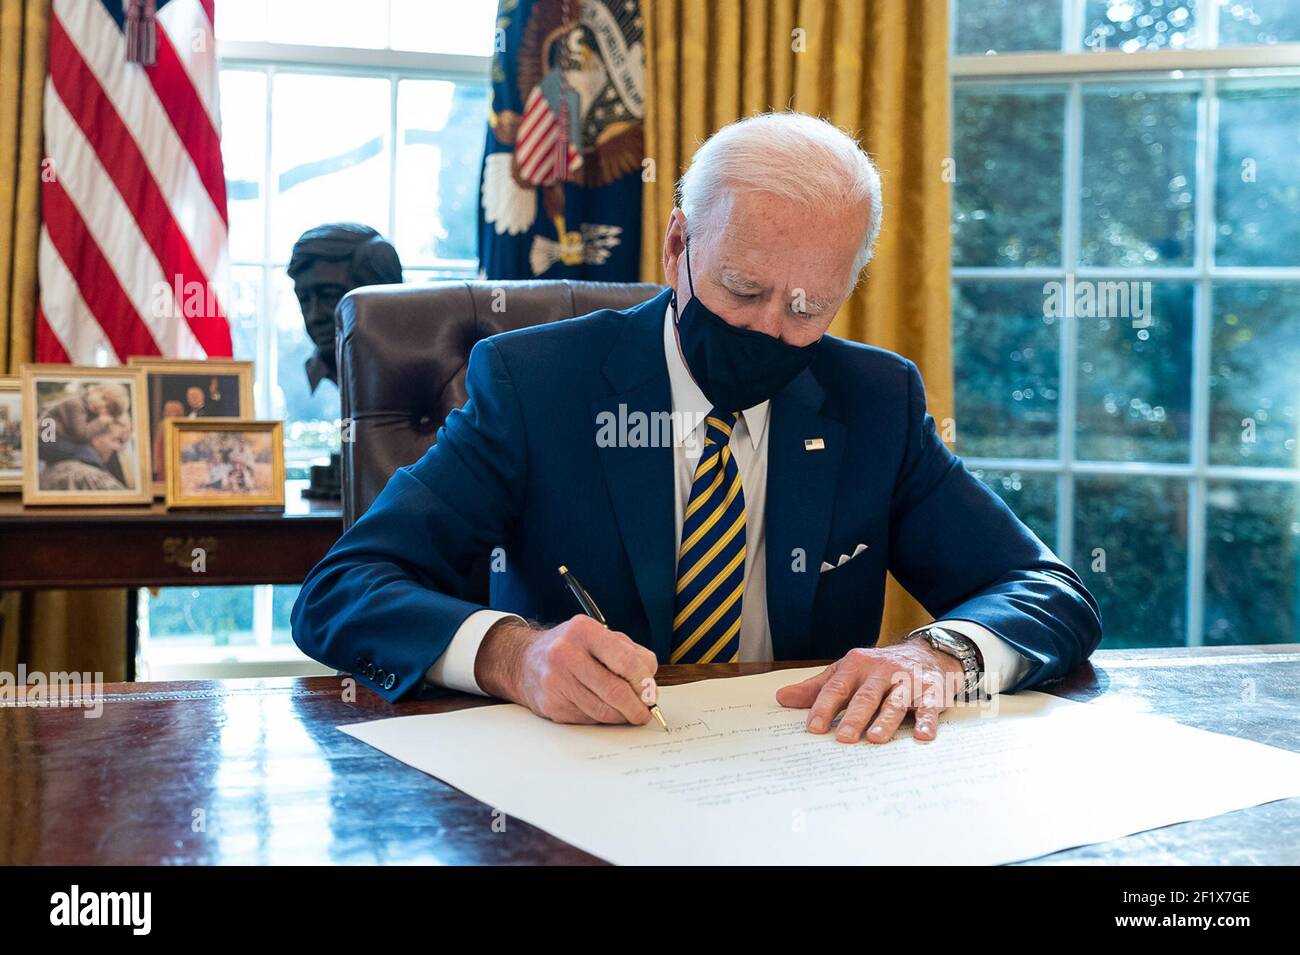 President Joe Biden signs the commission for Lloyd Austin to be Secretary of Defense Friday, Jan. 22, 2021, in the Oval Office of the White House. Lloyd Austin is the first black Secretary of Defense. Stock Photo